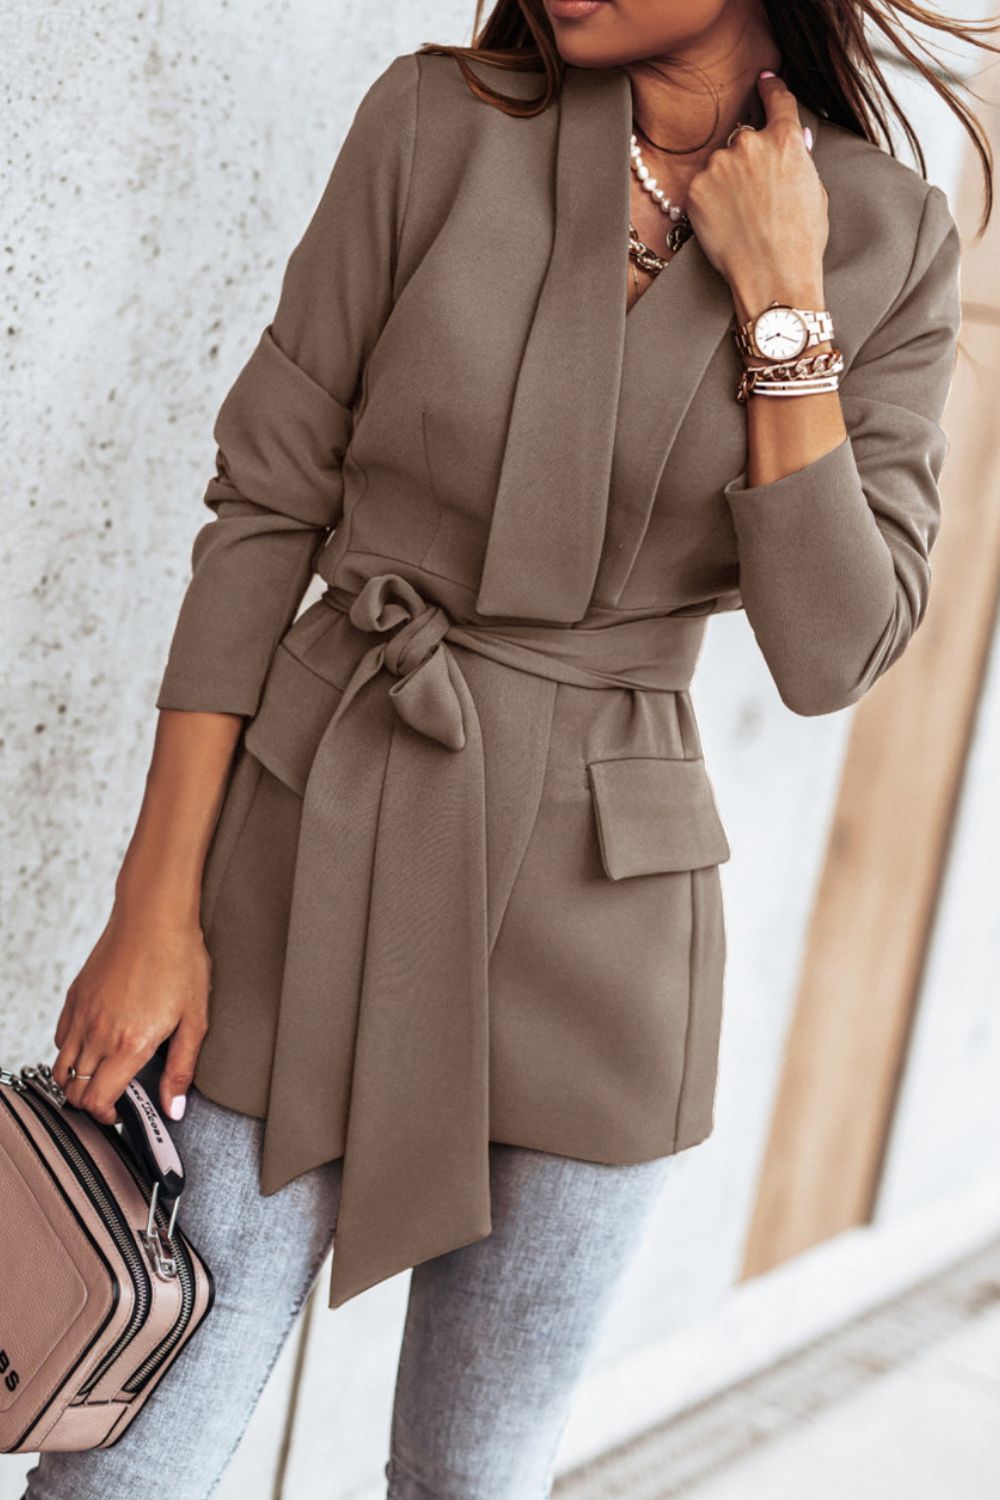 Belted Shawl Collar Blazer - Taupe / S Apparel & Accessories Wynter 4 All Seasons